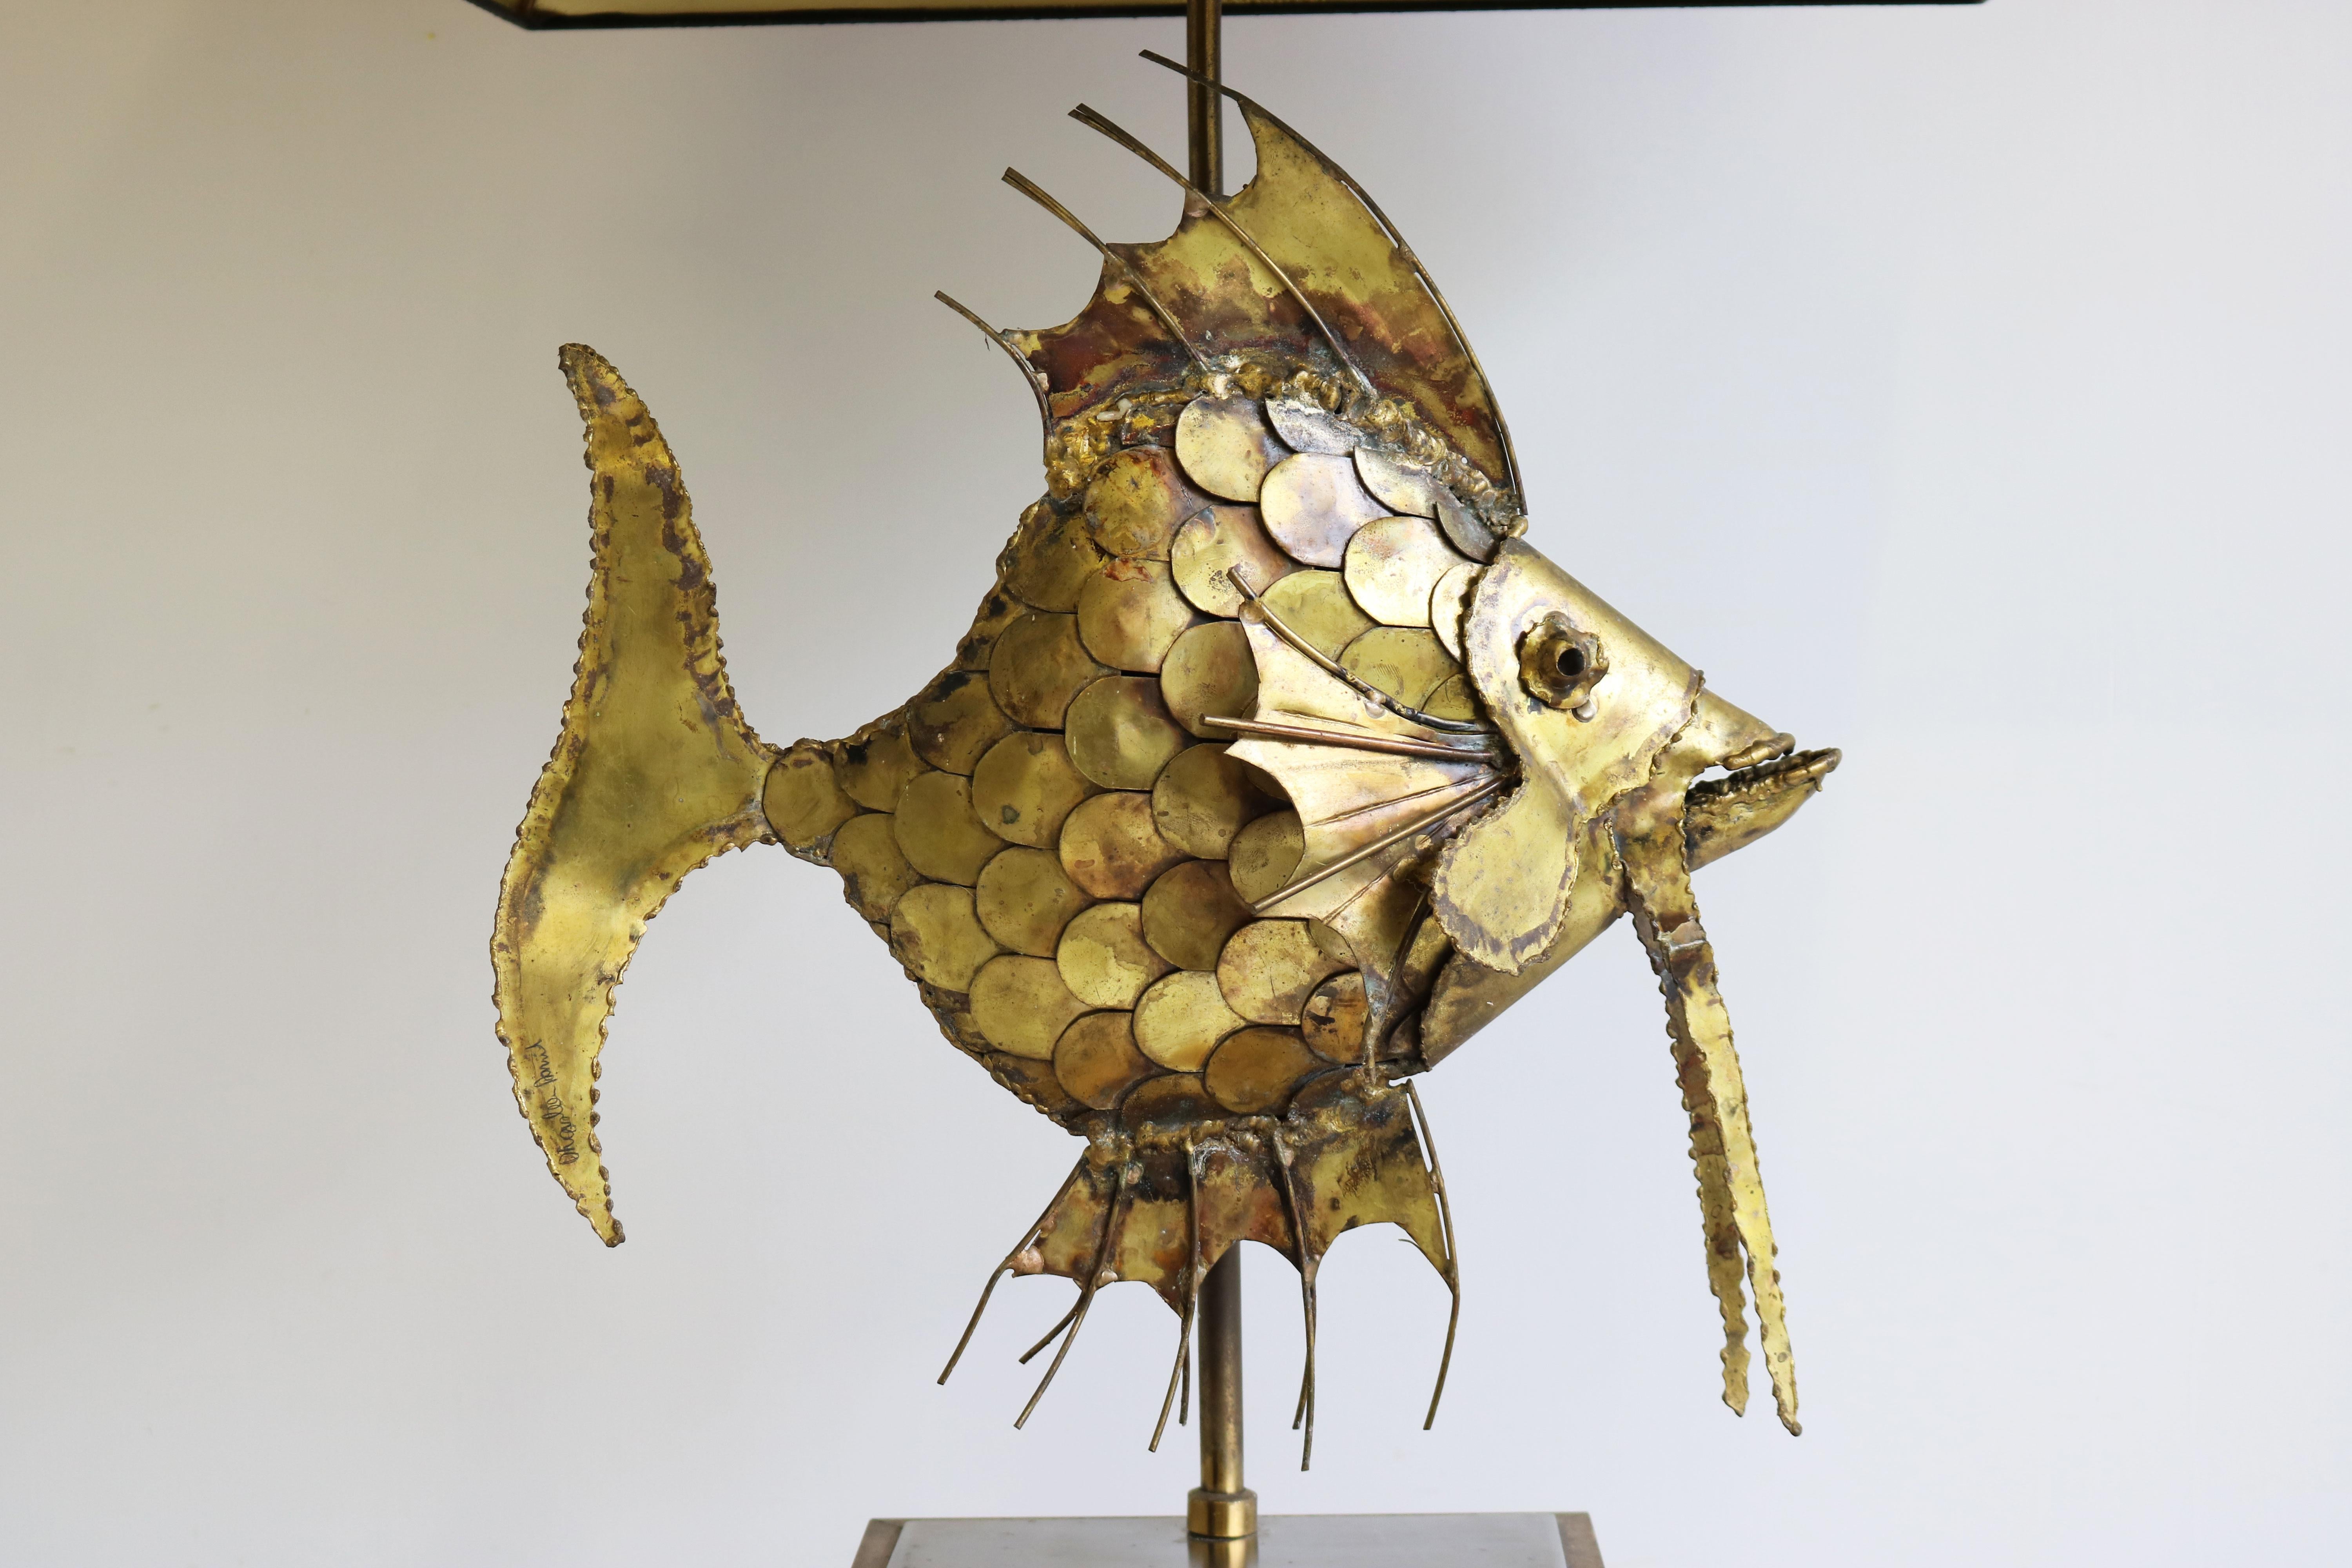 Gorgeous brutalist style fish sculpture in brass by famous Belgium artist Daniel d'haeseleer 1970 signed on the tail by the artist.
The fish is very large and looks amazing, gorgeous craftsmanship & attention to detail.
The chandelier has 2 light